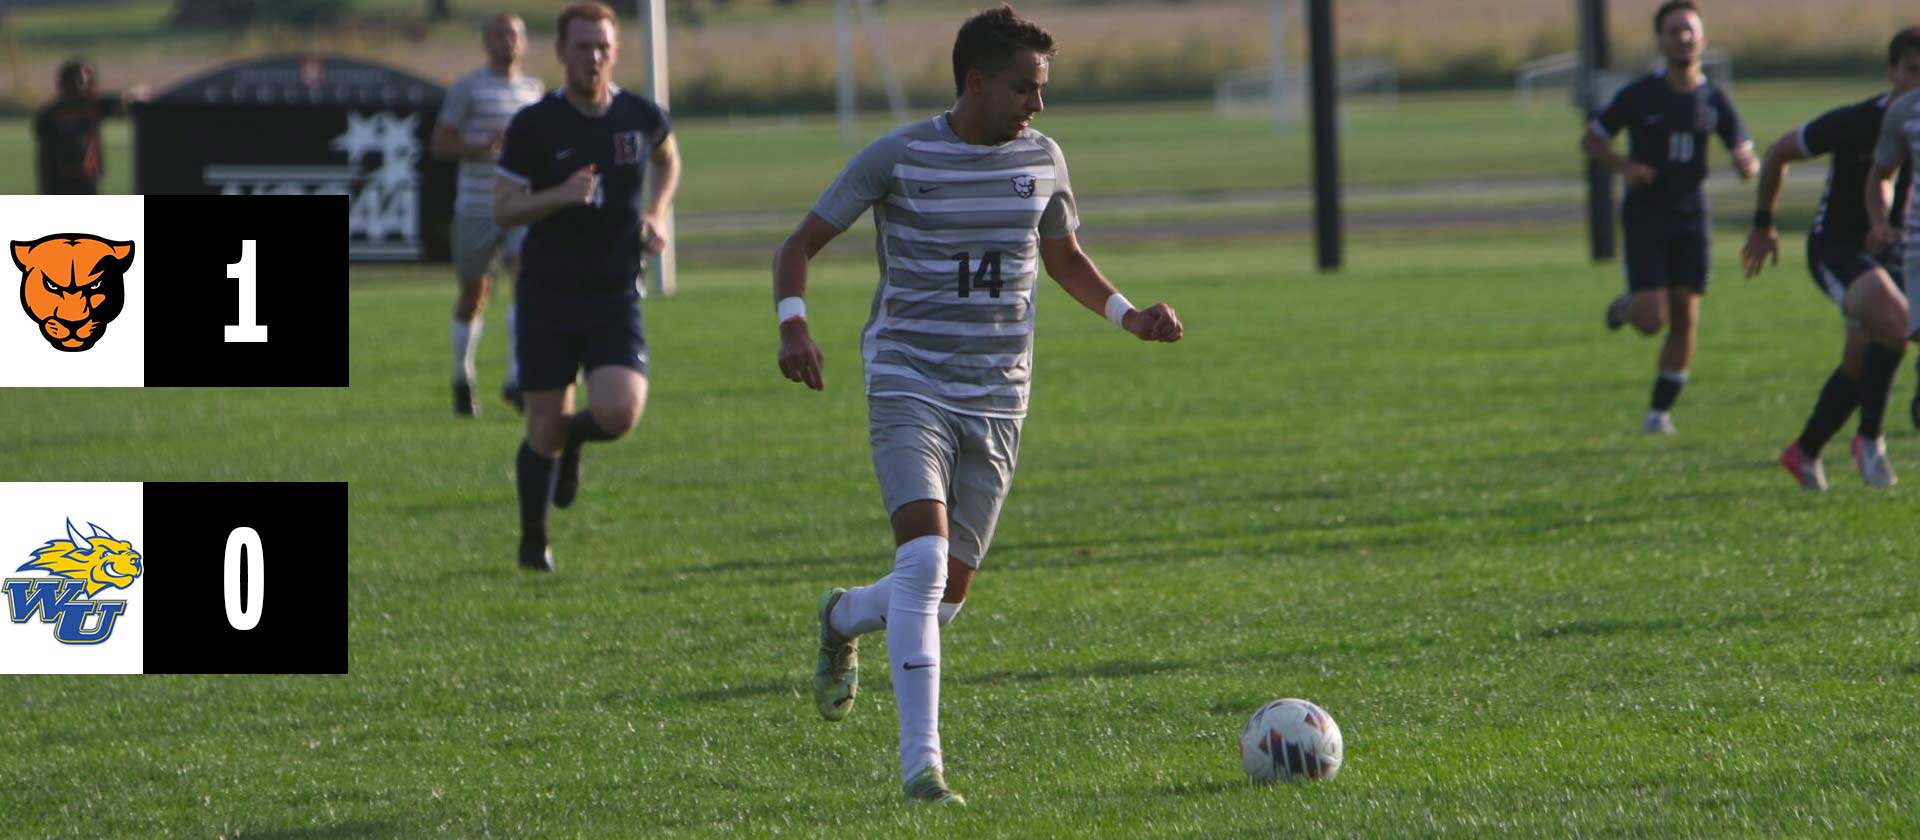 Men's soccer tops Webster 1-0 in Homecoming match